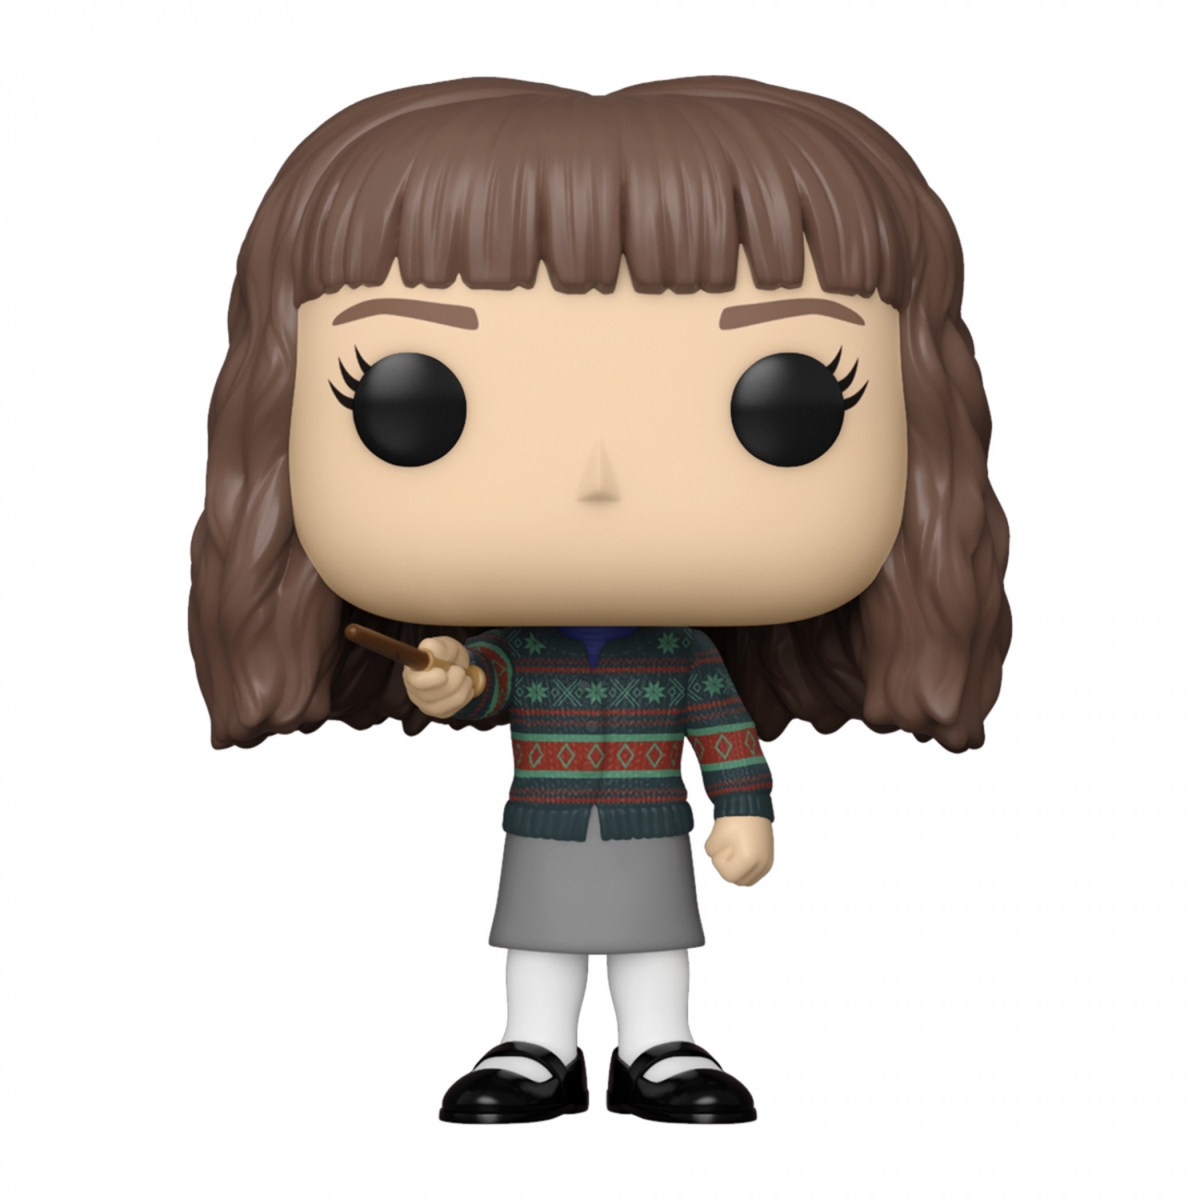 Picture of Harry Potter 835091 Harry Potter Hermione Granger with Wand Funko Pop Vinyl Figure